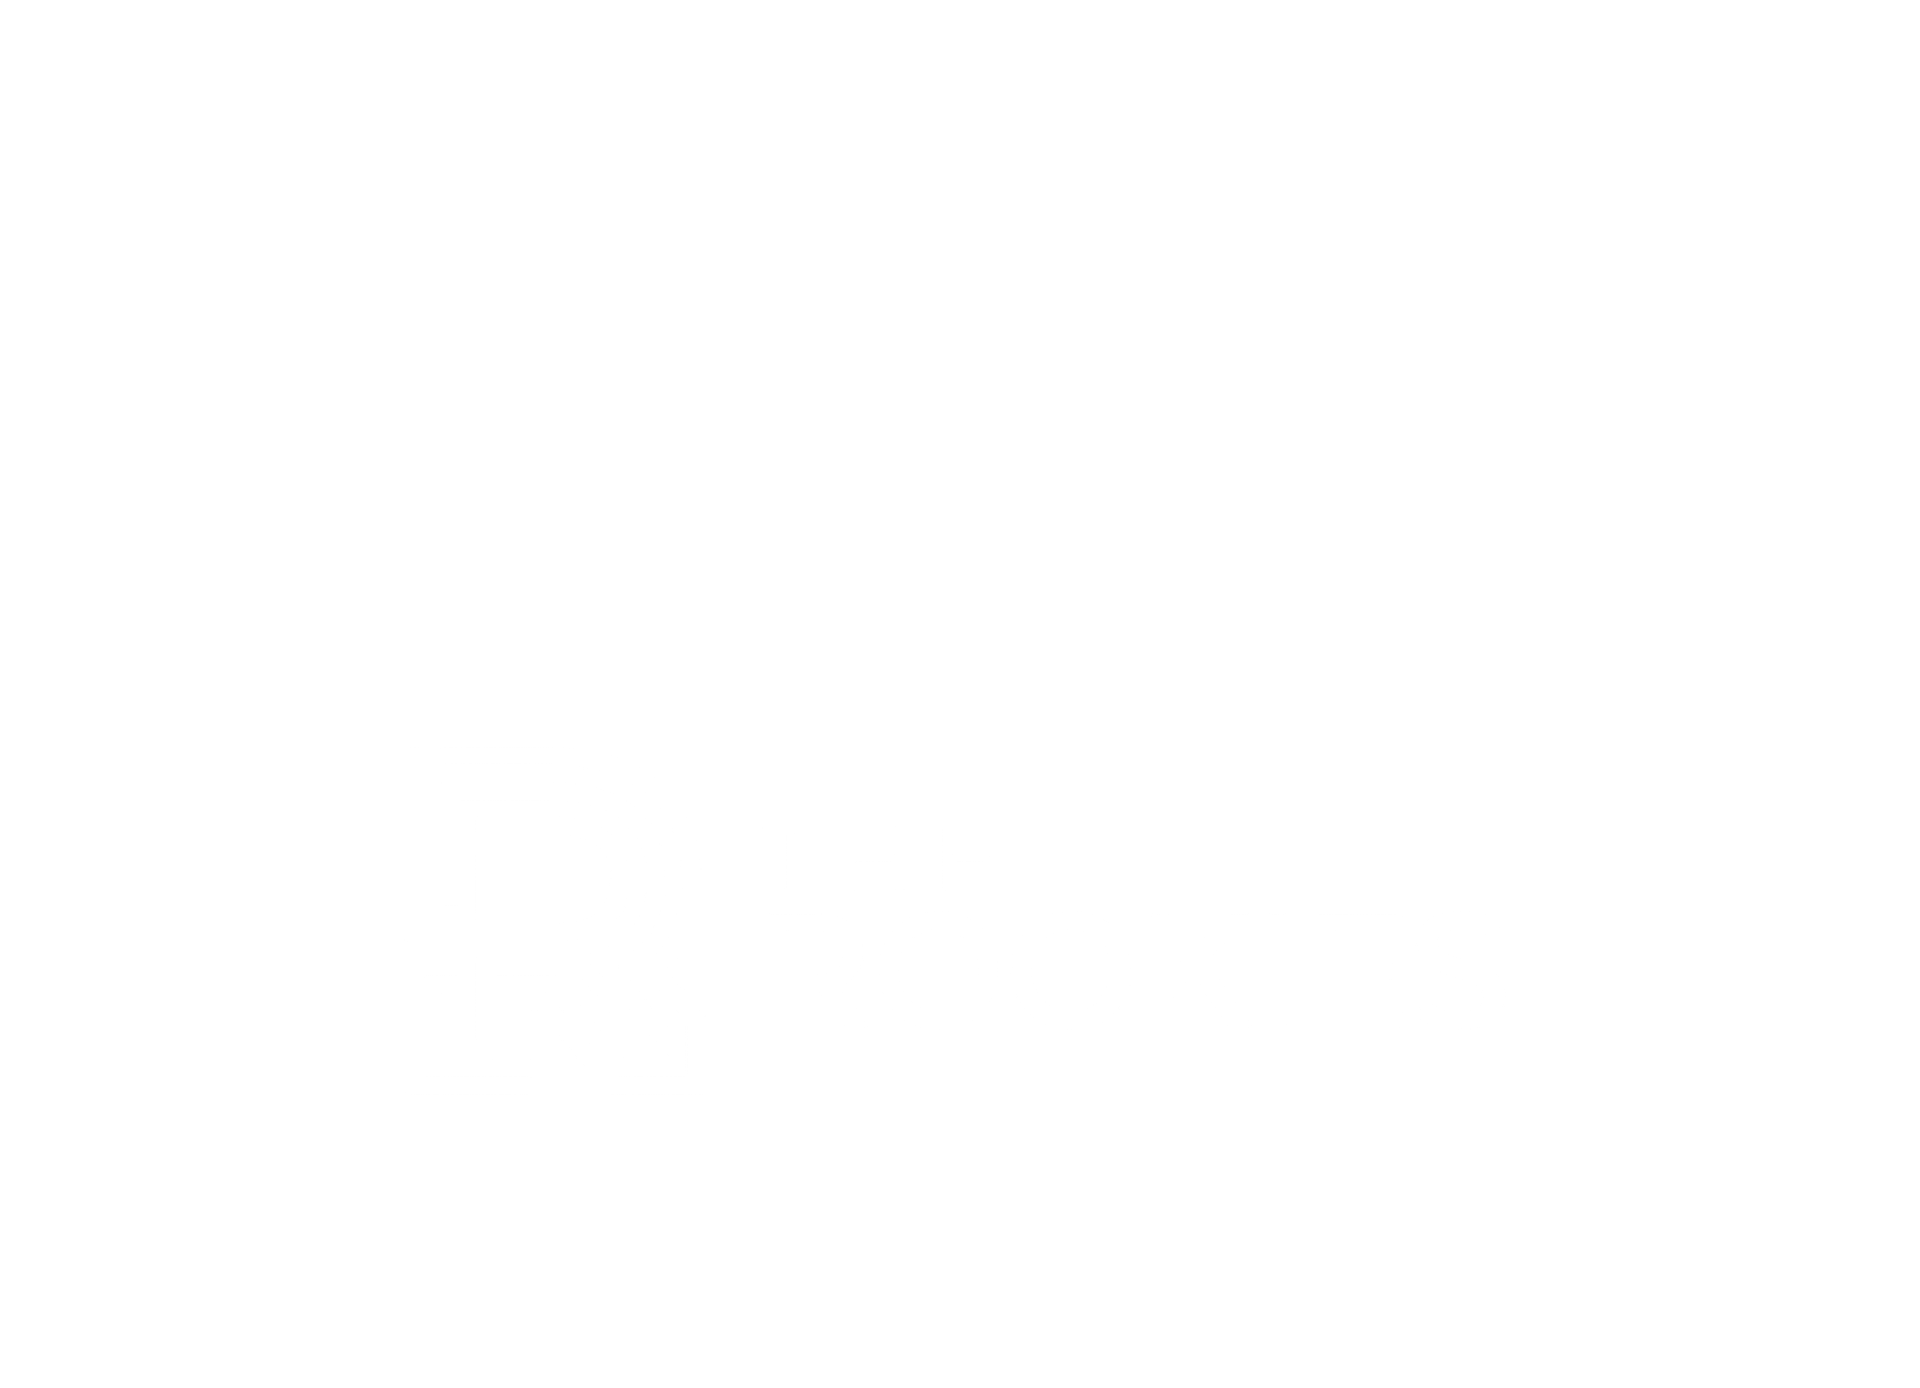 Recognition from The Rookies to Lost Boys as the top 5 best vfx school worldwide from 2017 to 2021.